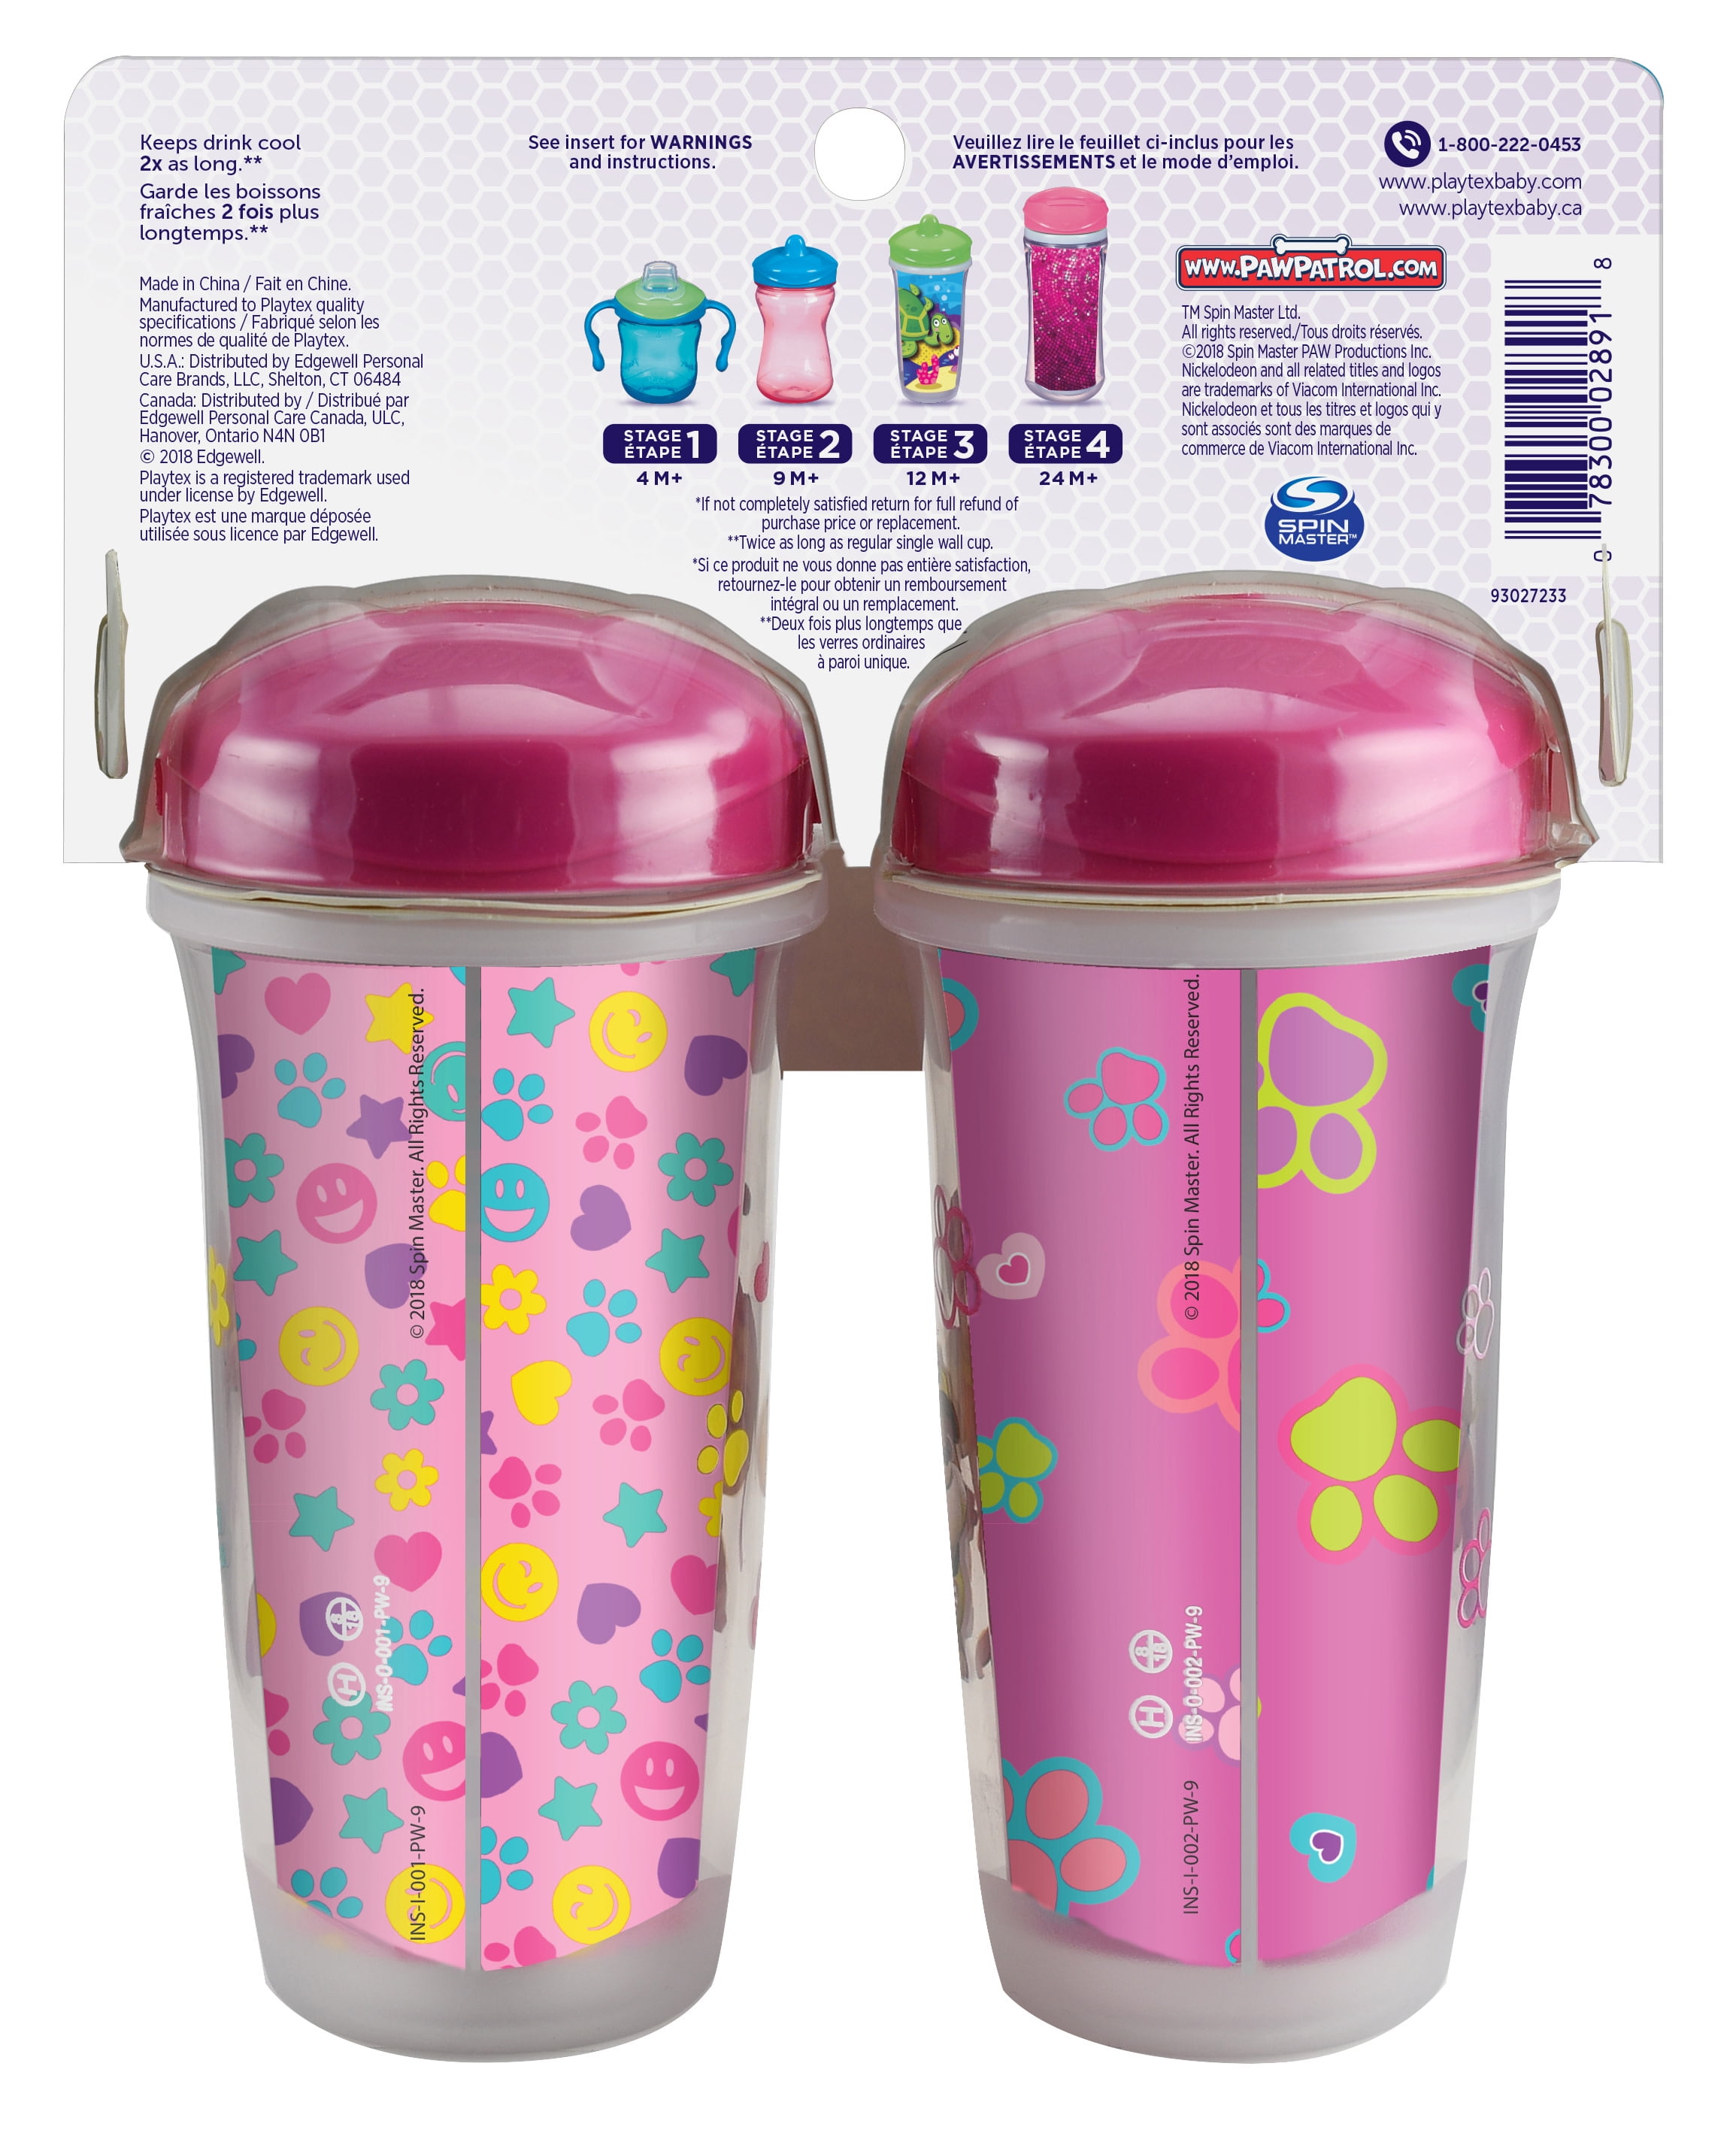 Playtex Sipsters Stage 2 Paw Patrol Girls Spoutless Sippy Cup, 10 Oz